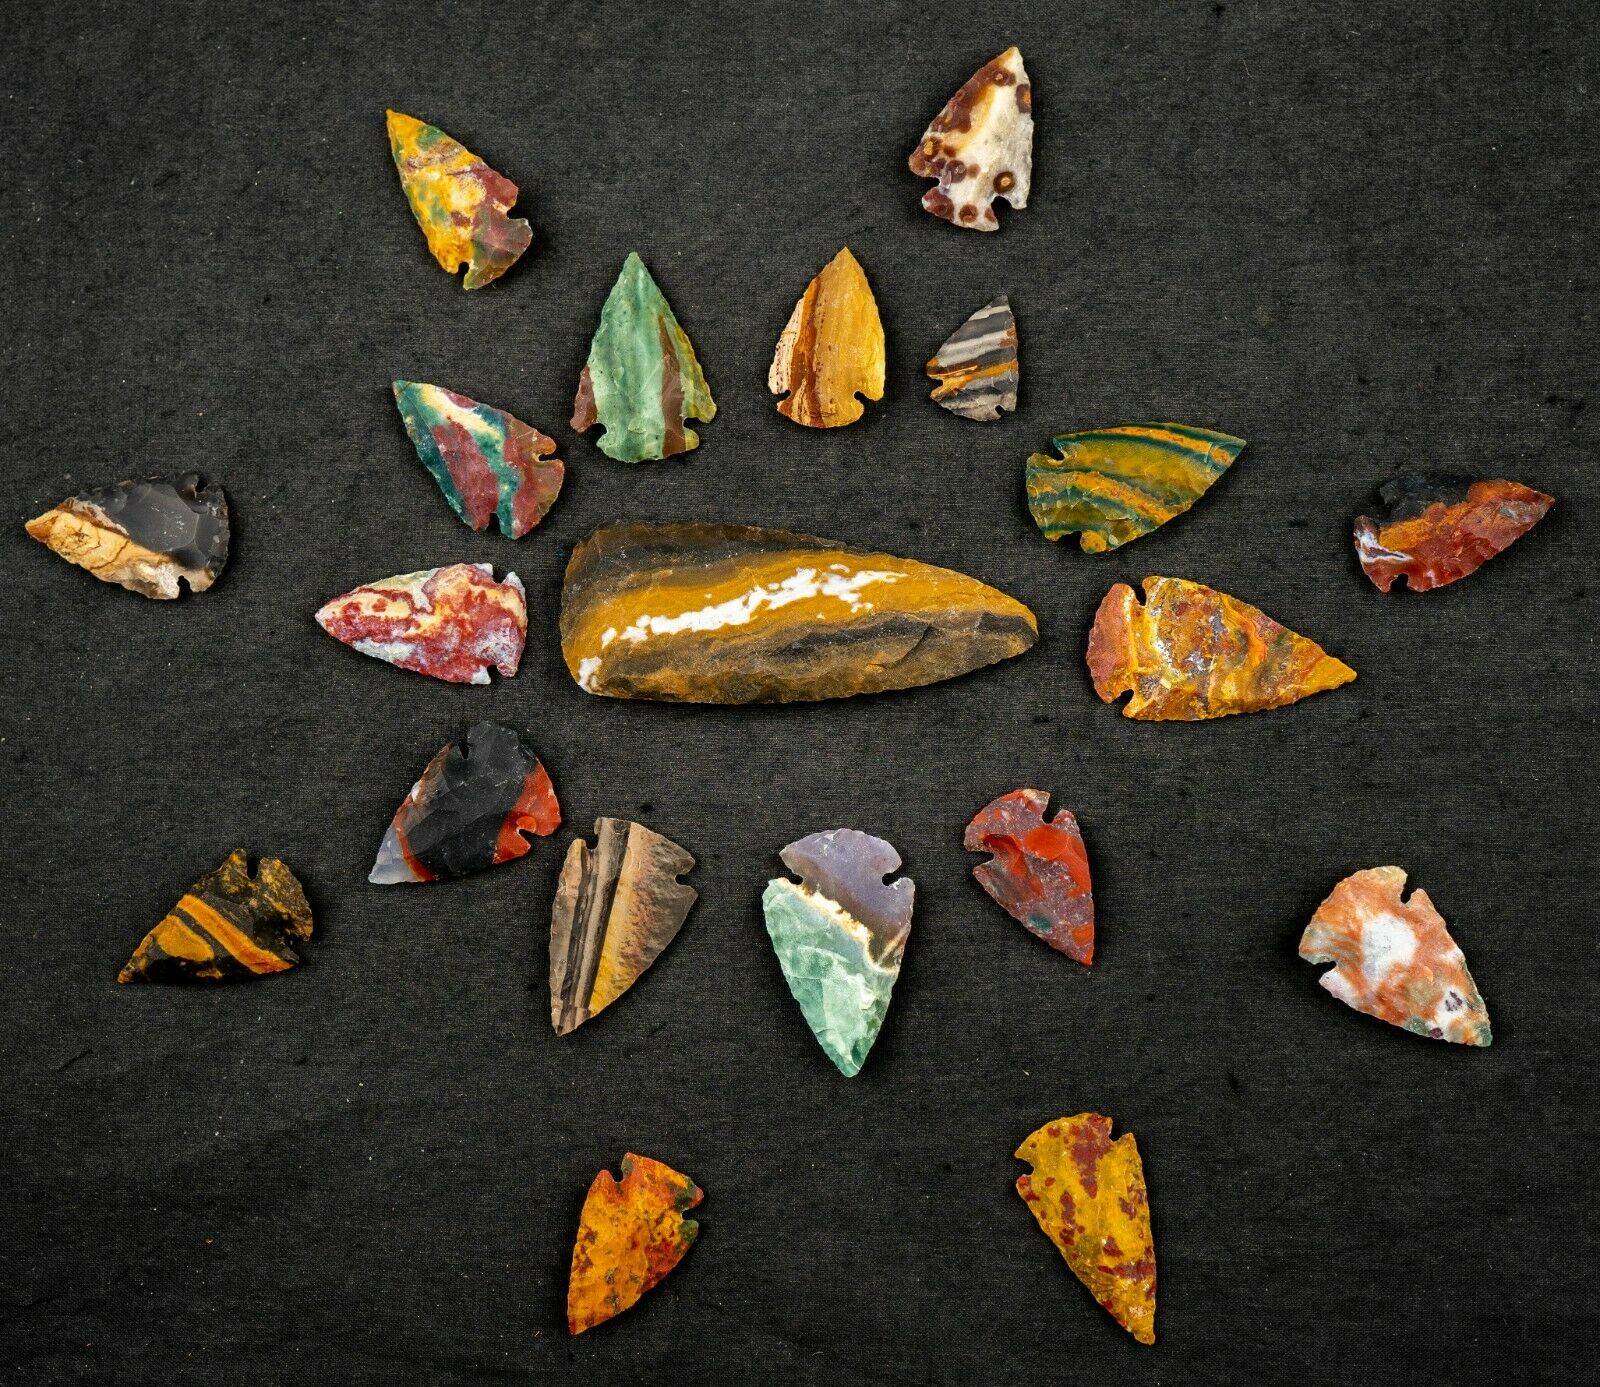 *** 20 Pc Lot Flint Arrowhead Oh Collection Project Stone Spear Point ***